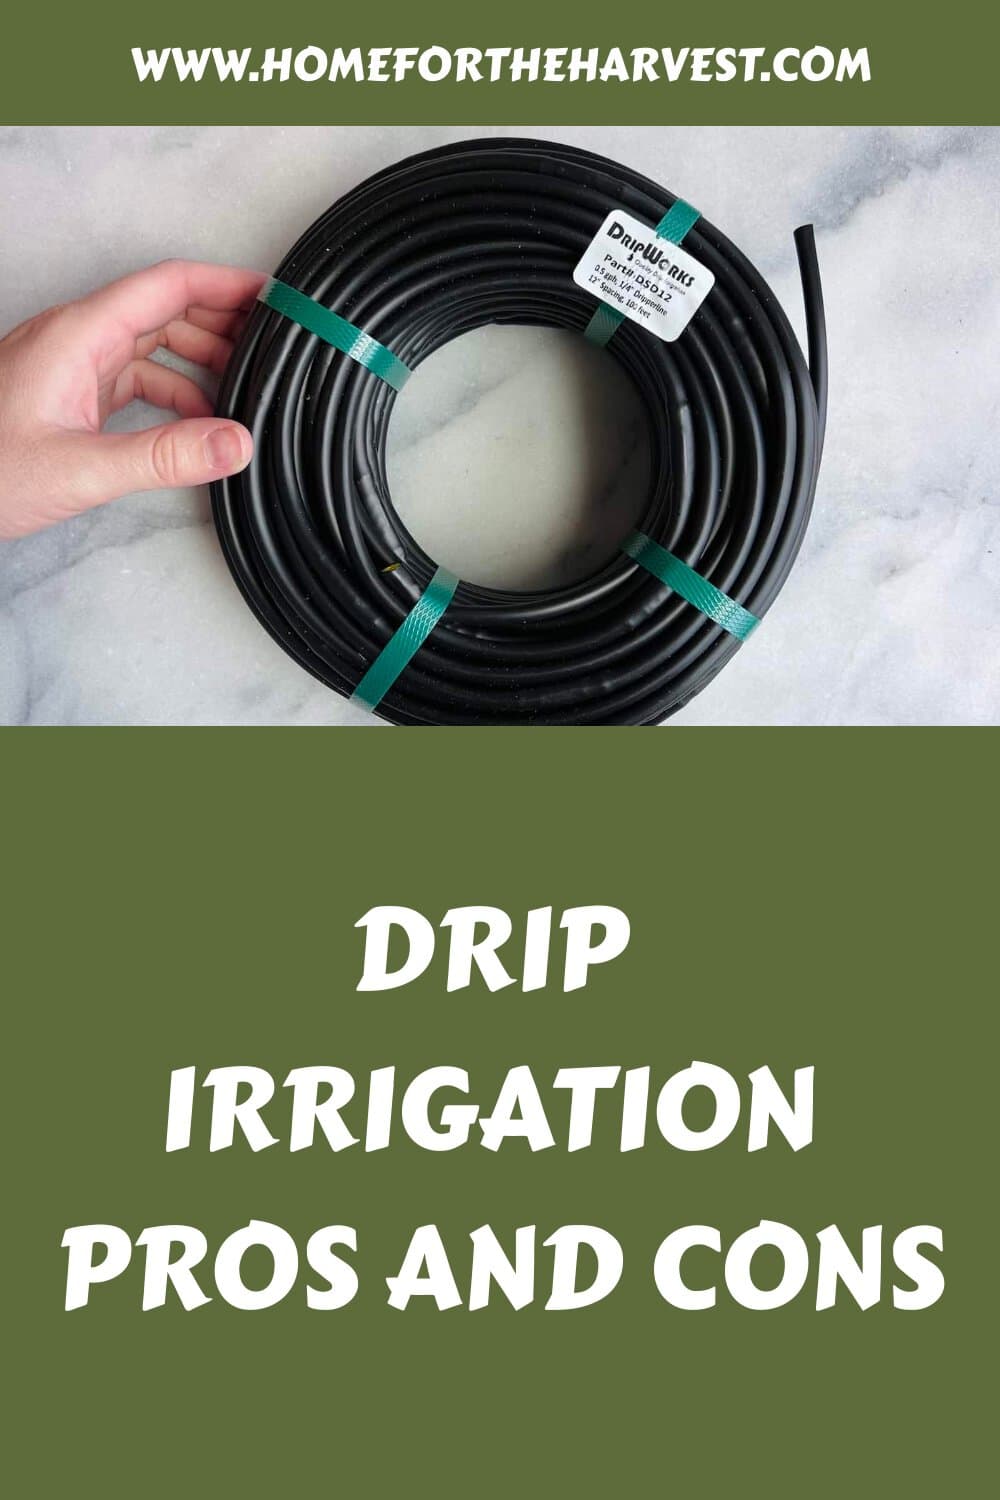 Drip irrigation pros and cons generated pin 68568